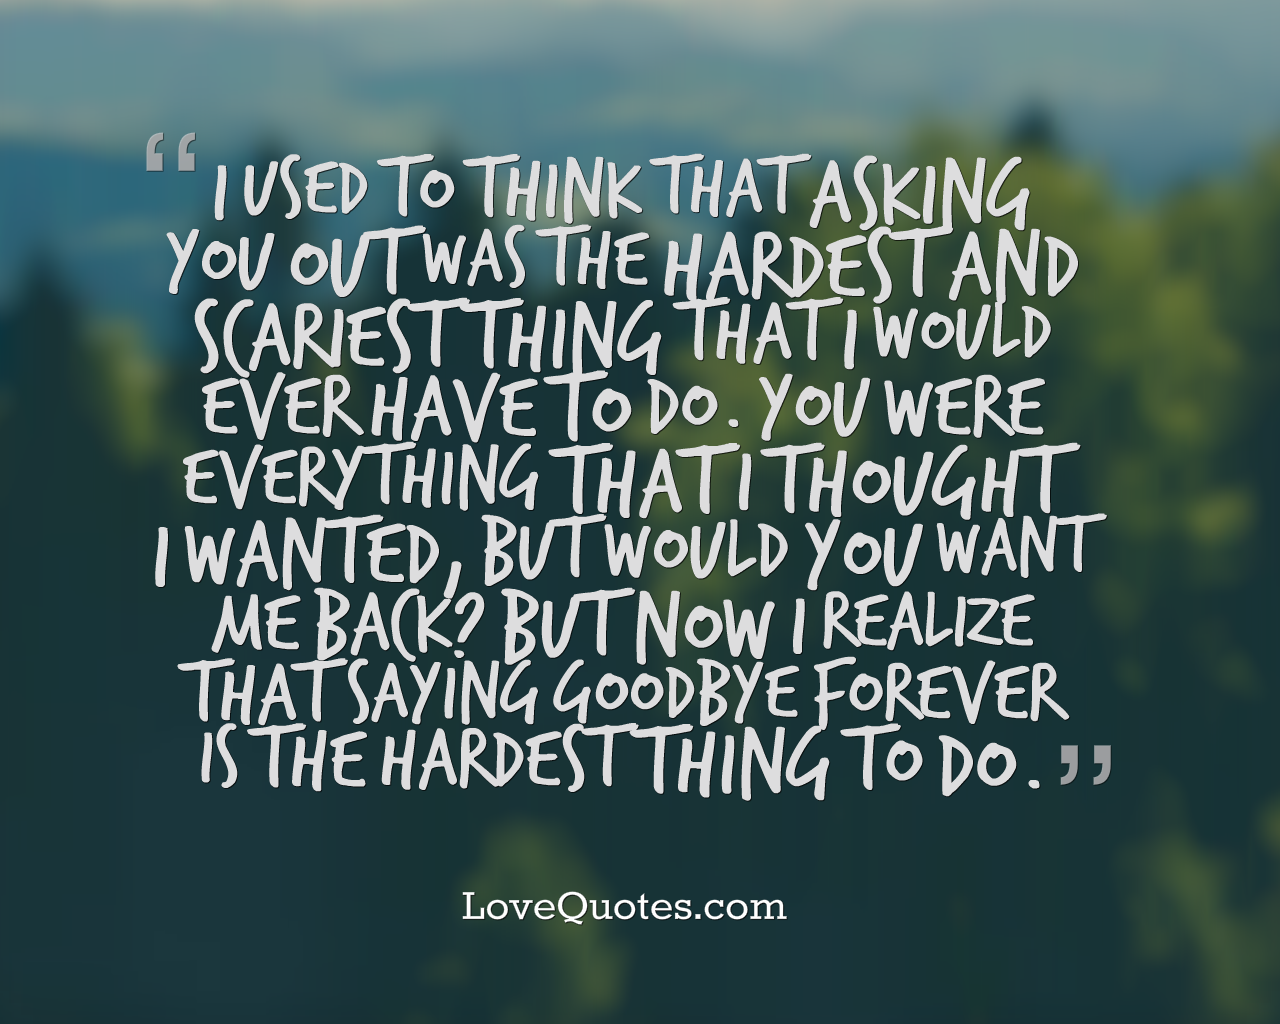 Saying Goodbye Forever - Love Quotes